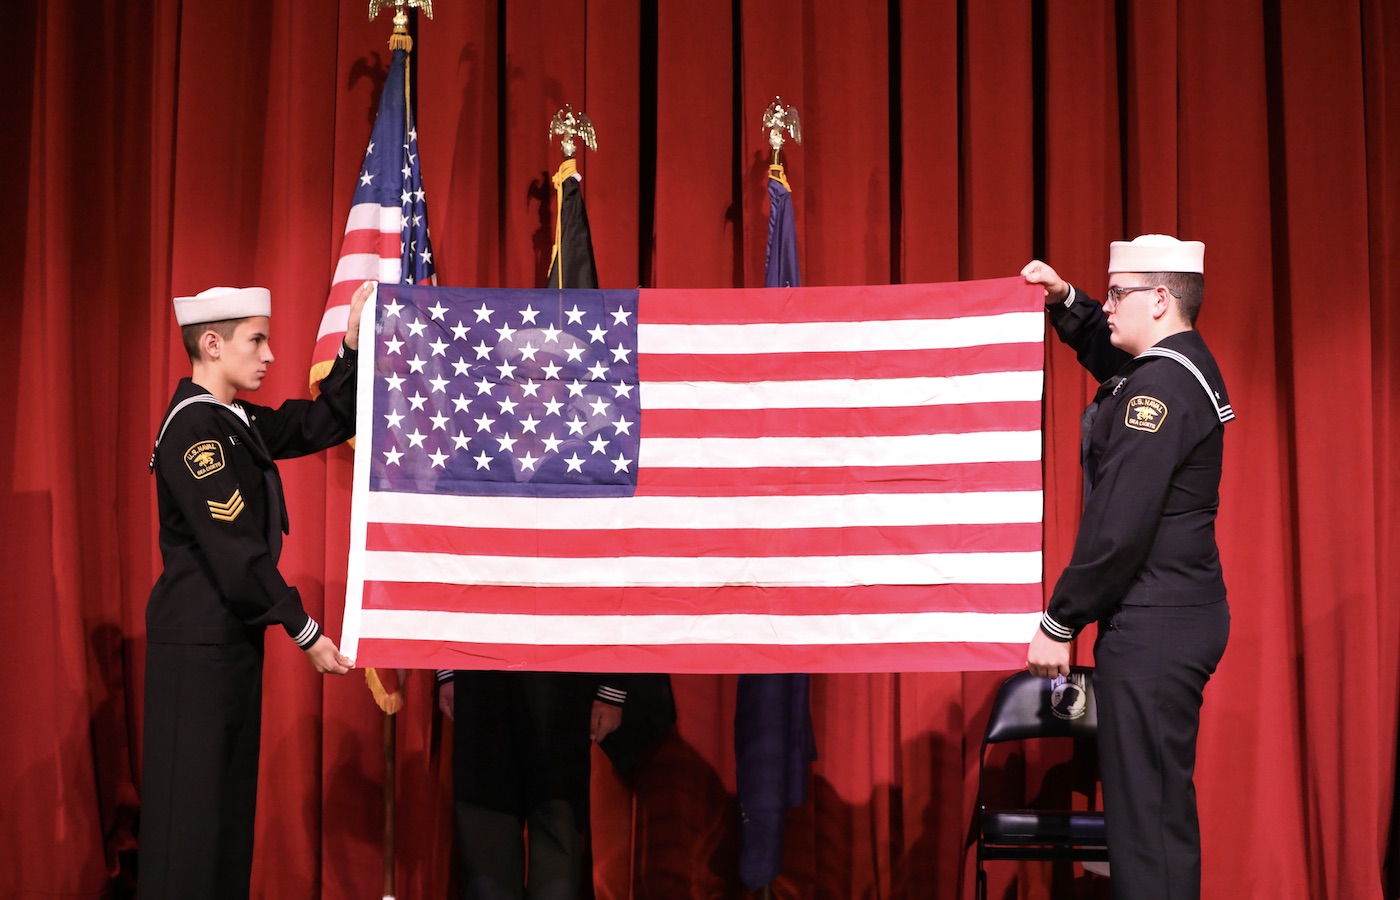 Cadets holding an American flag at Veterans Day ceremony